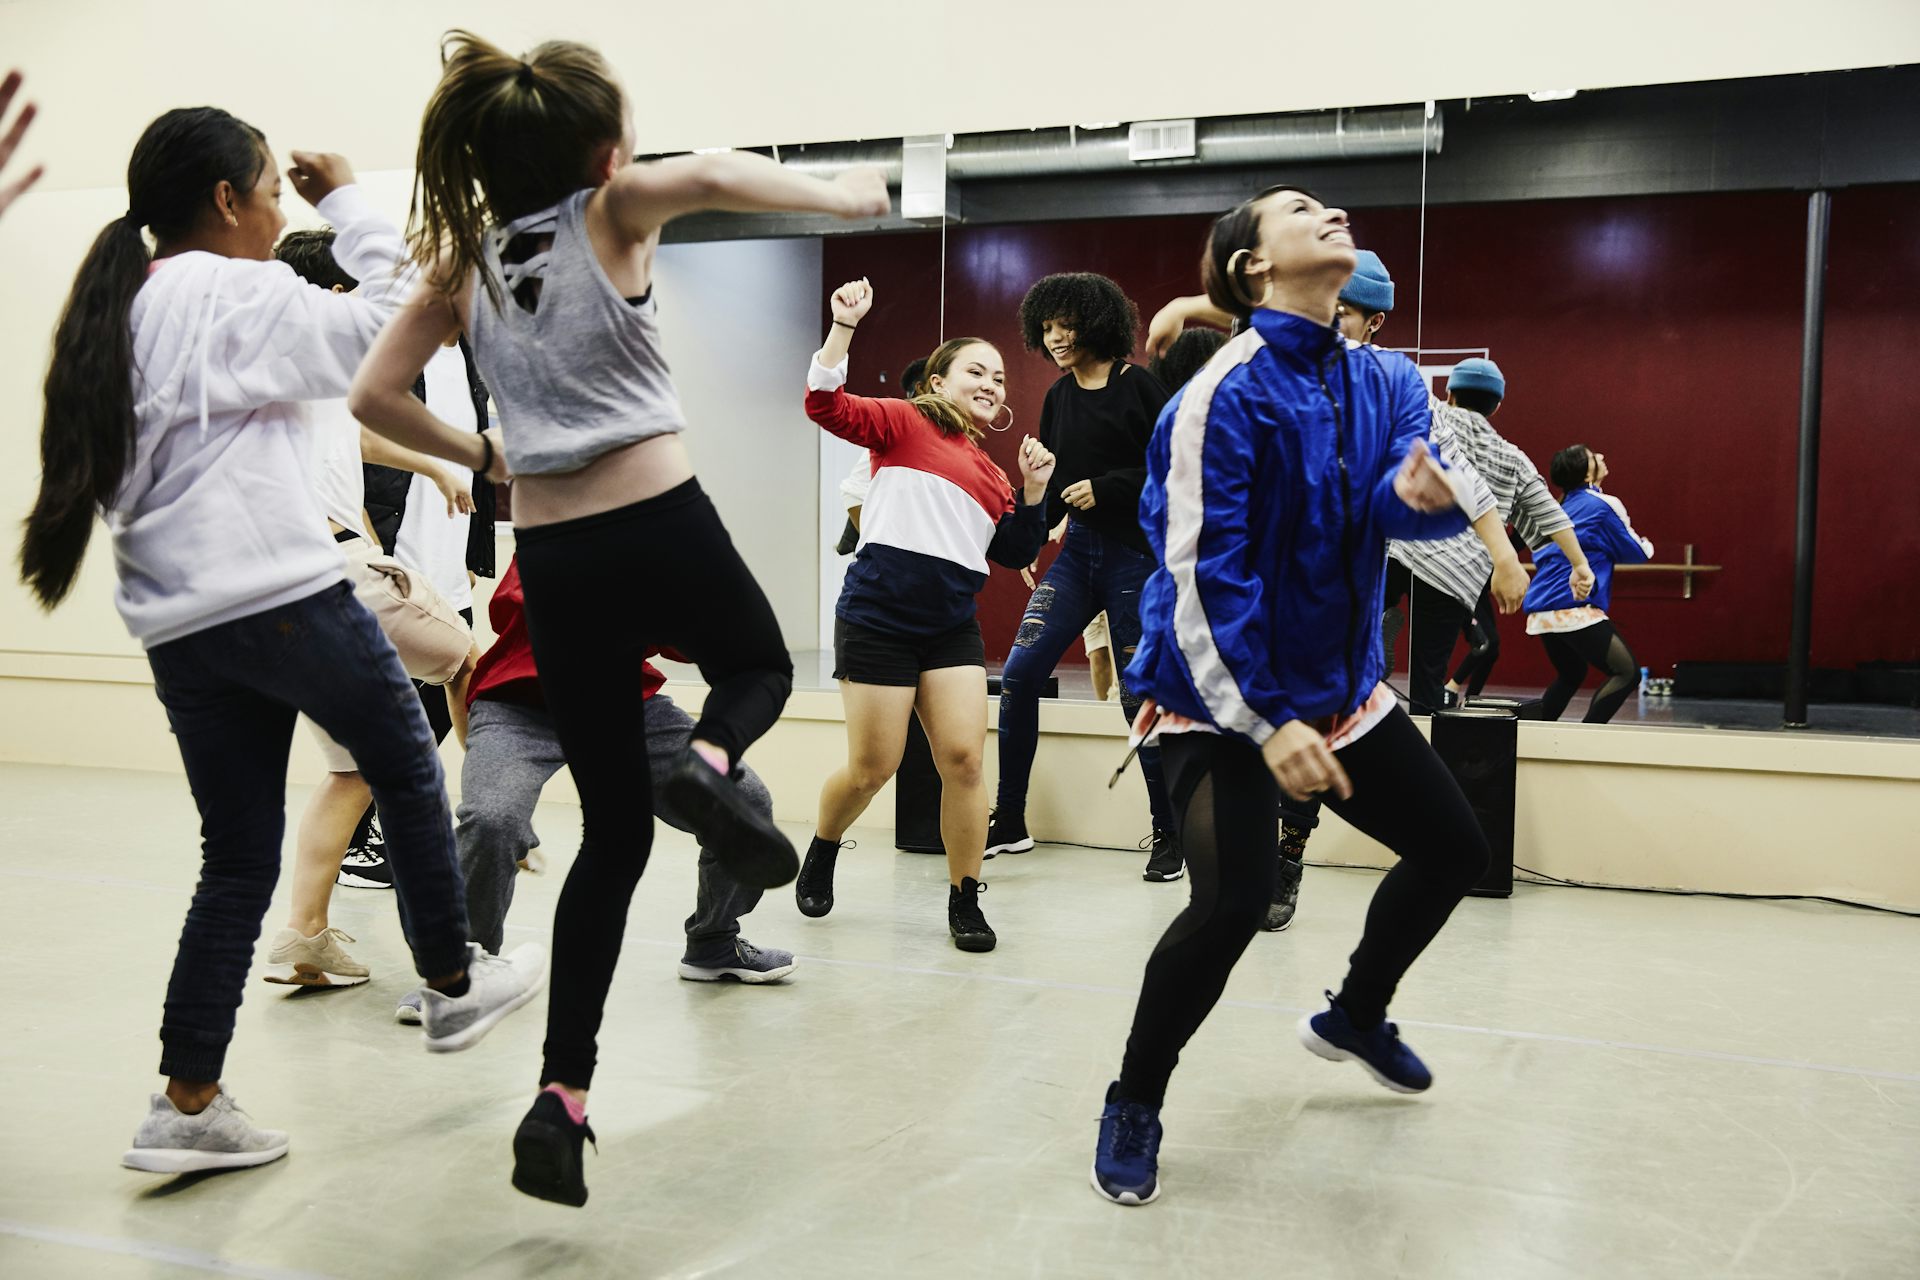 A group of hip-hop dancers, in sweats and stockings, practice in a dance studio.